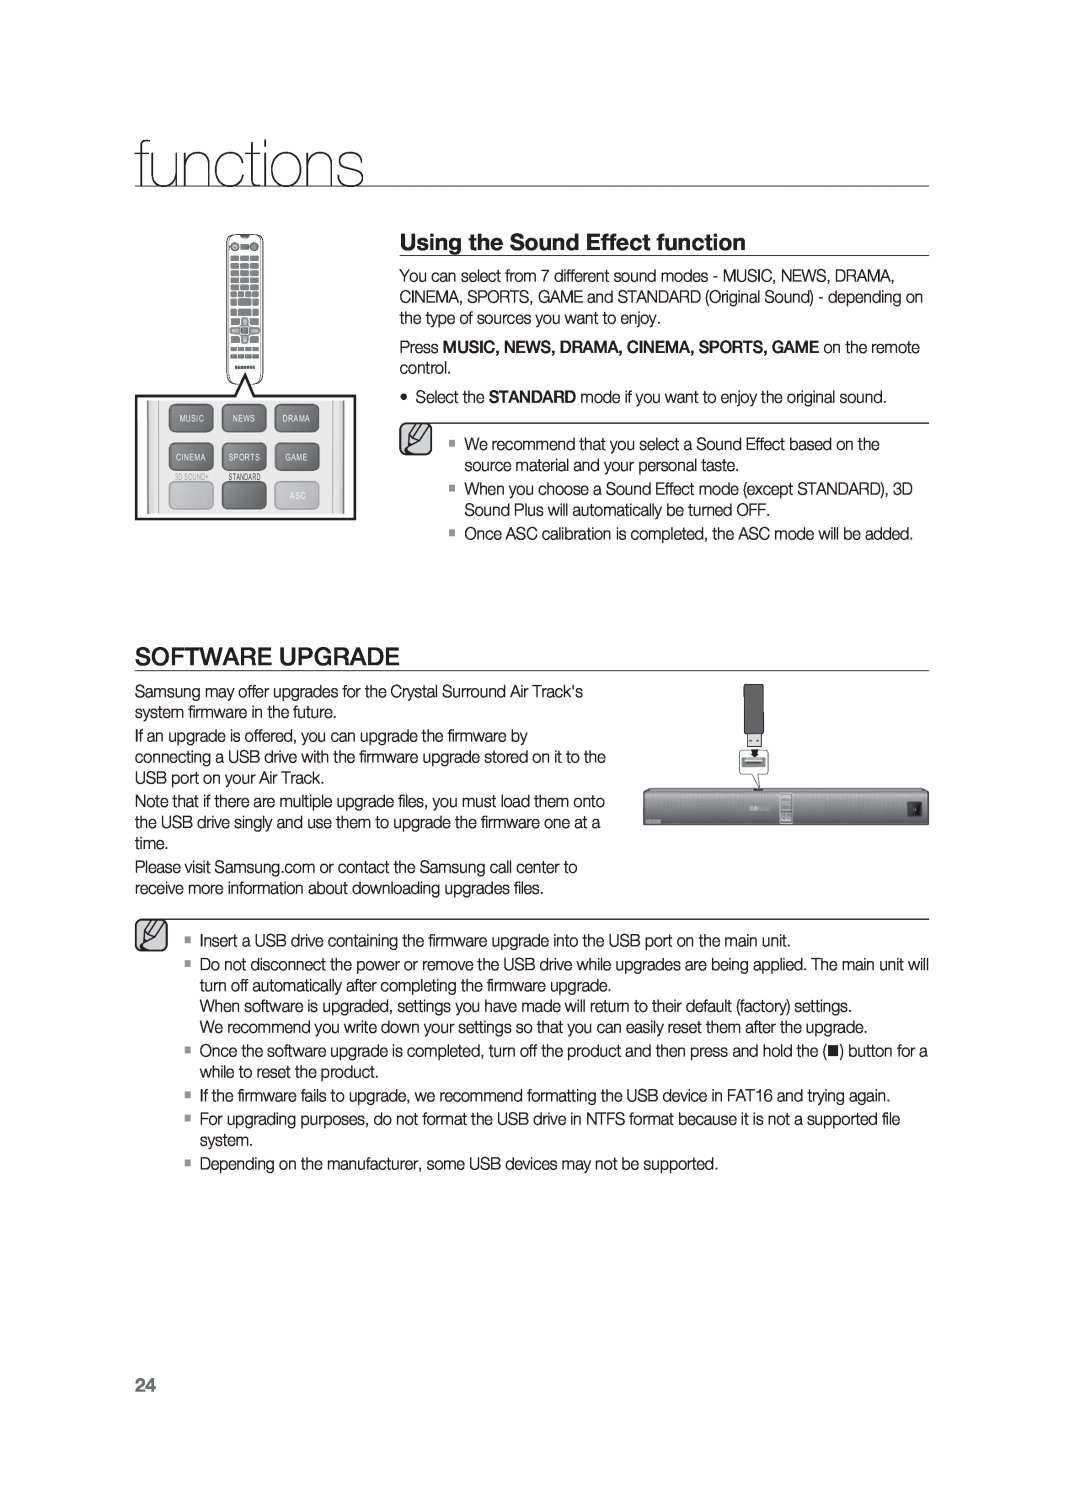 Samsung HW-F850/ZA user manual Software Upgrade, Using the Sound Effect function, functions 